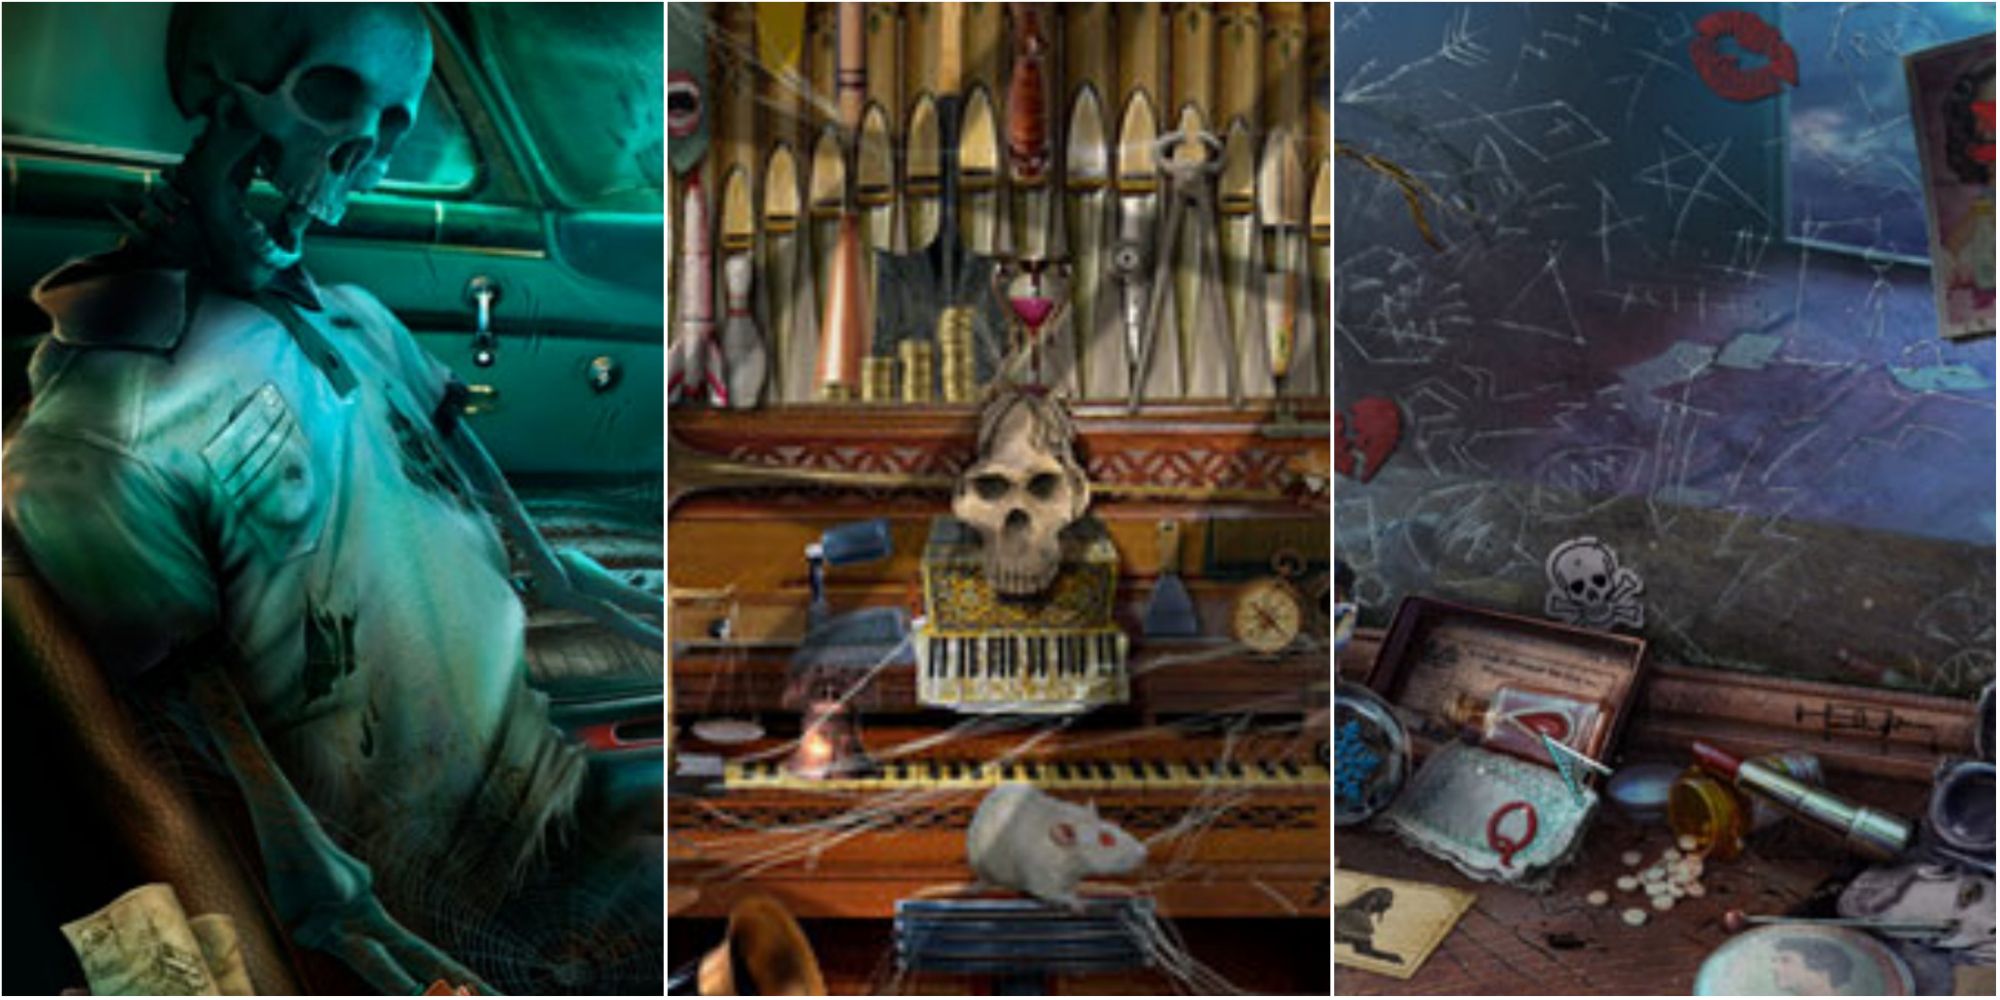 Three images in one, all featuring various skeletons and skulls